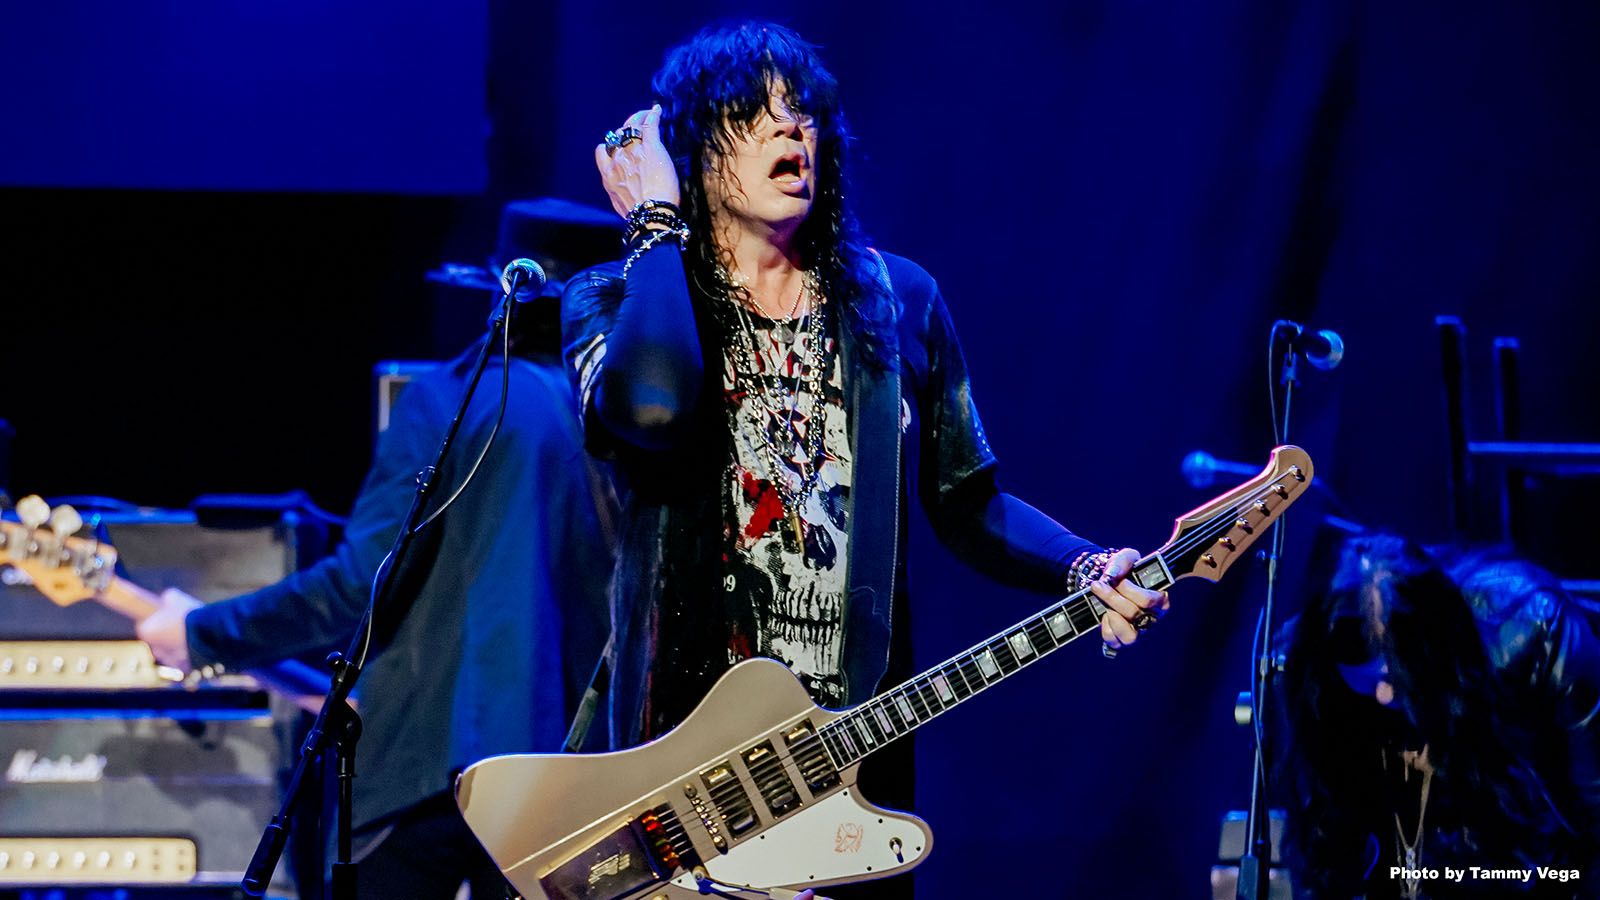 Former Cinderella frontman Tom Keifer will be at Eagles Theatre in Wabash on Saturday, Aug. 12.